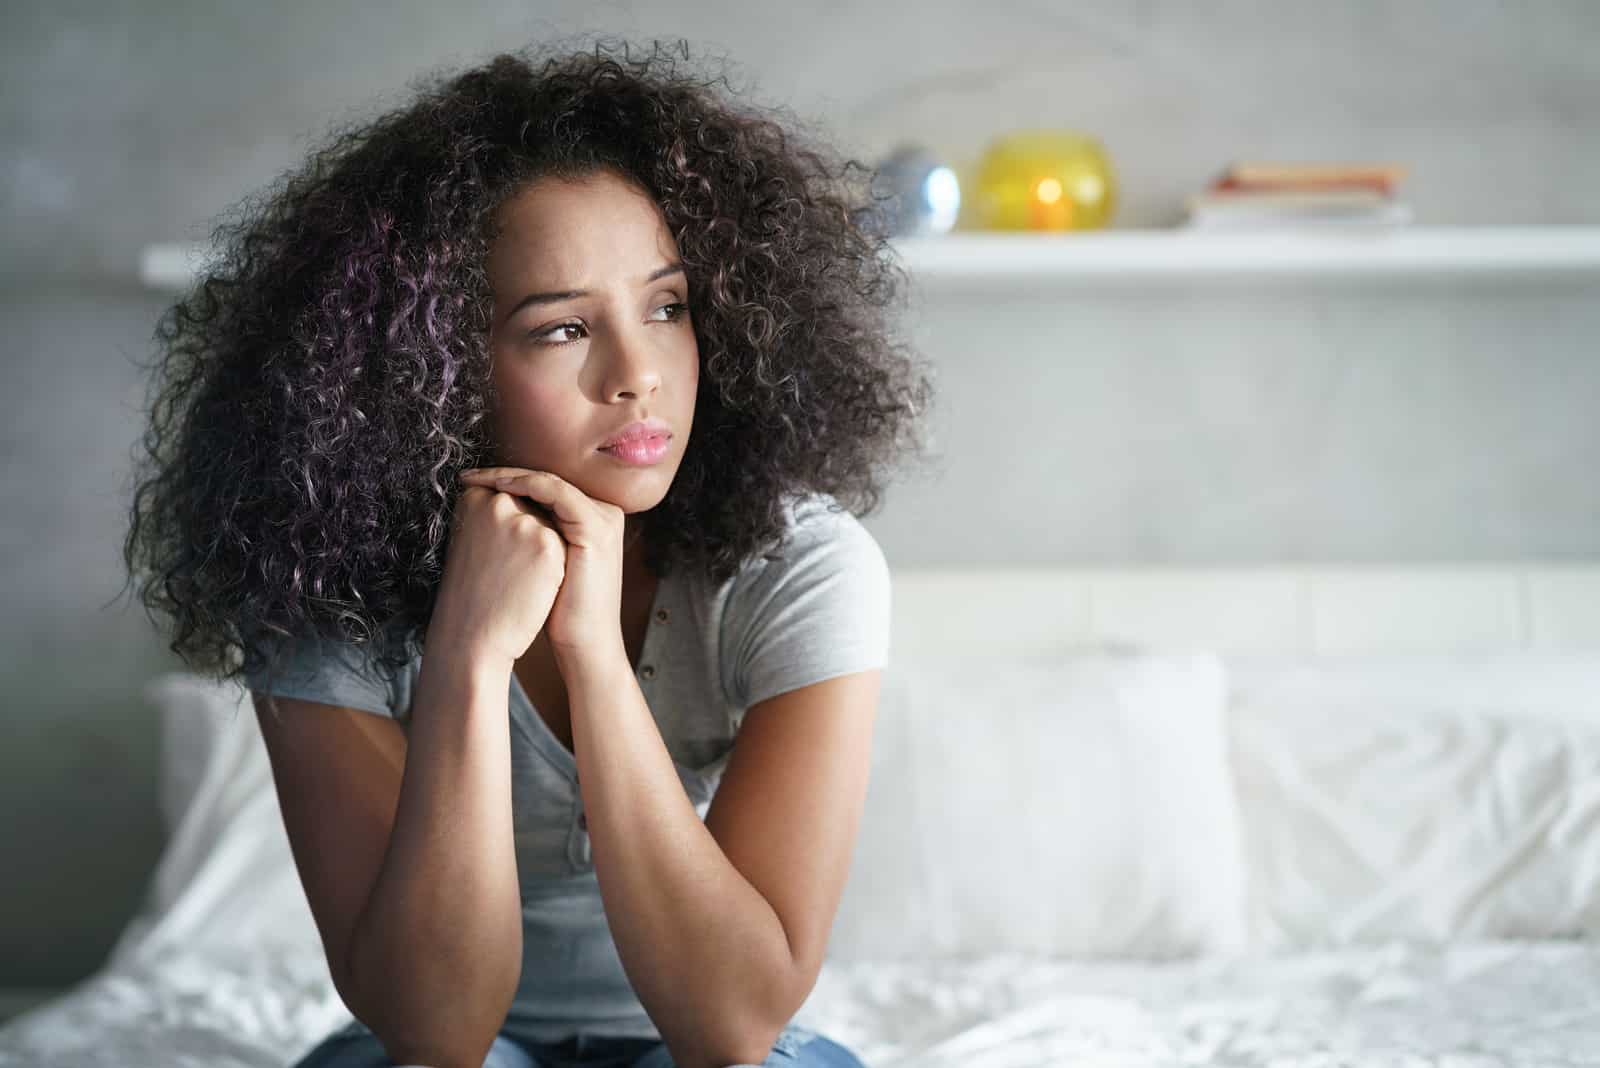 a disappointed woman with frizzy hair is sitting on the bed